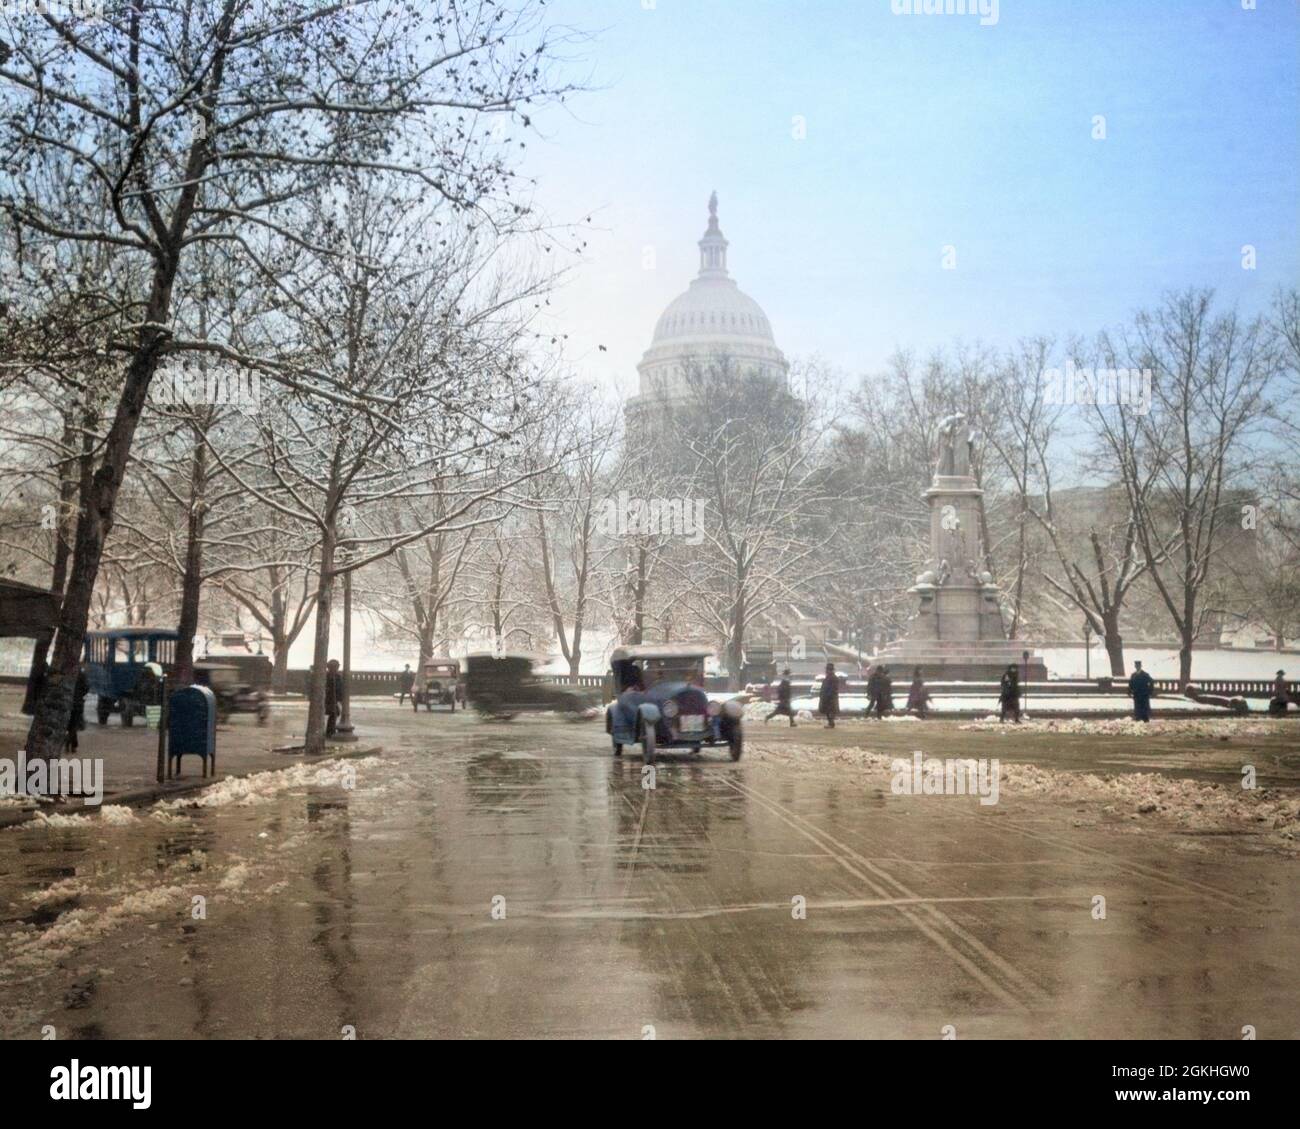 1920s 1930s THE CAPITOL BUILDING AND OLD AUTOMOBILE TRAFFIC IN WINTER WASHINGTON DC USA - q74124c CPC001 HARS DOME AUTOMOBILES VEHICLES STATUE OF FREEDOM SEASON OLD FASHIONED Stock Photo